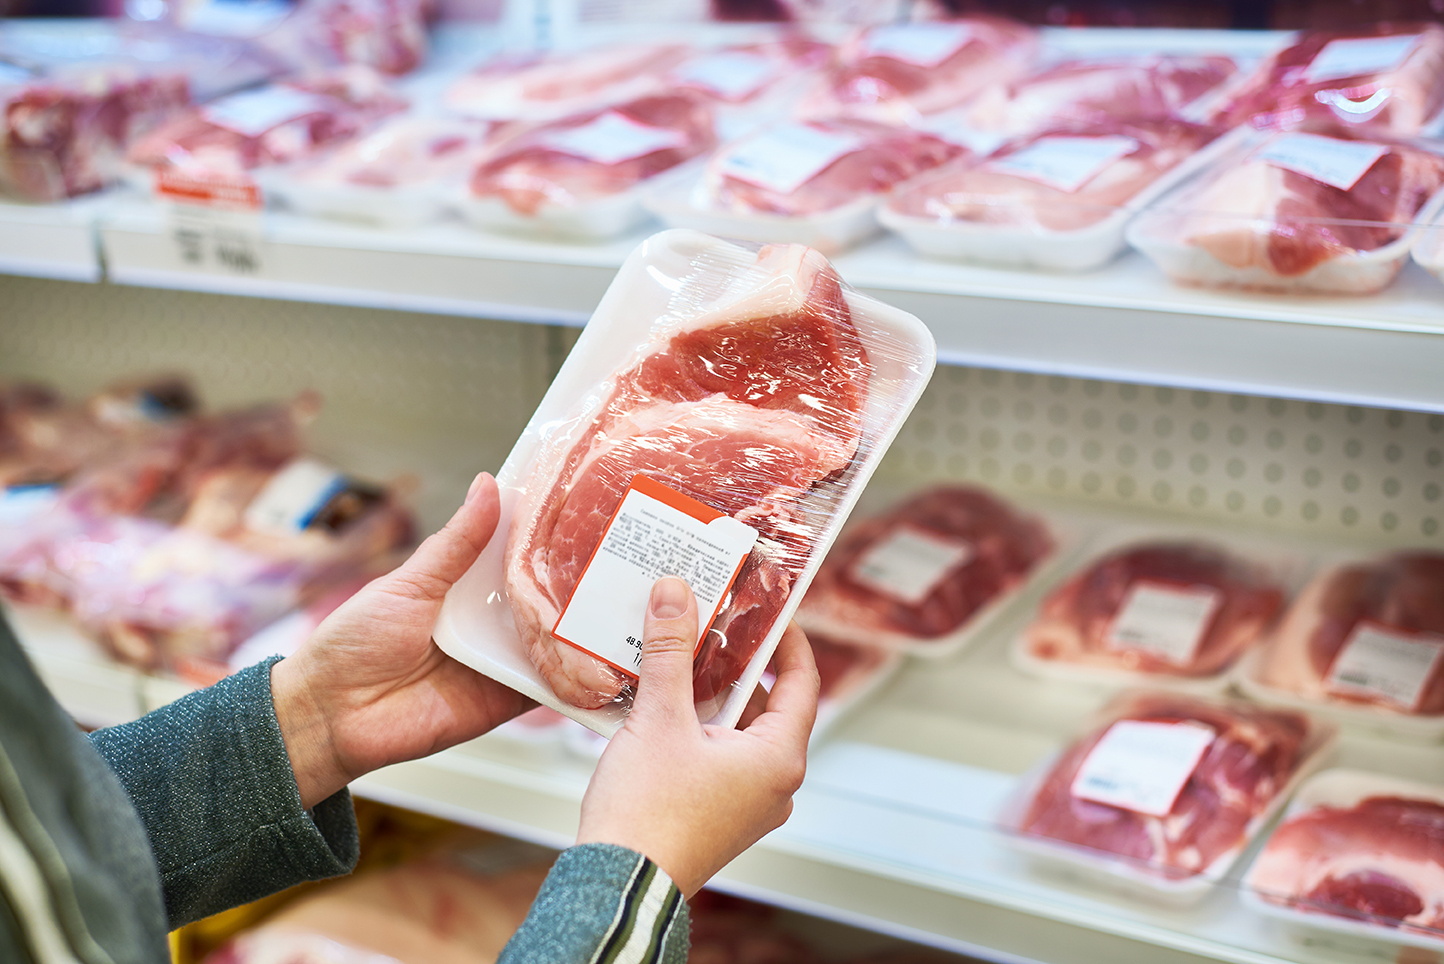 Buyer hands with pork meat packages at the grocery store